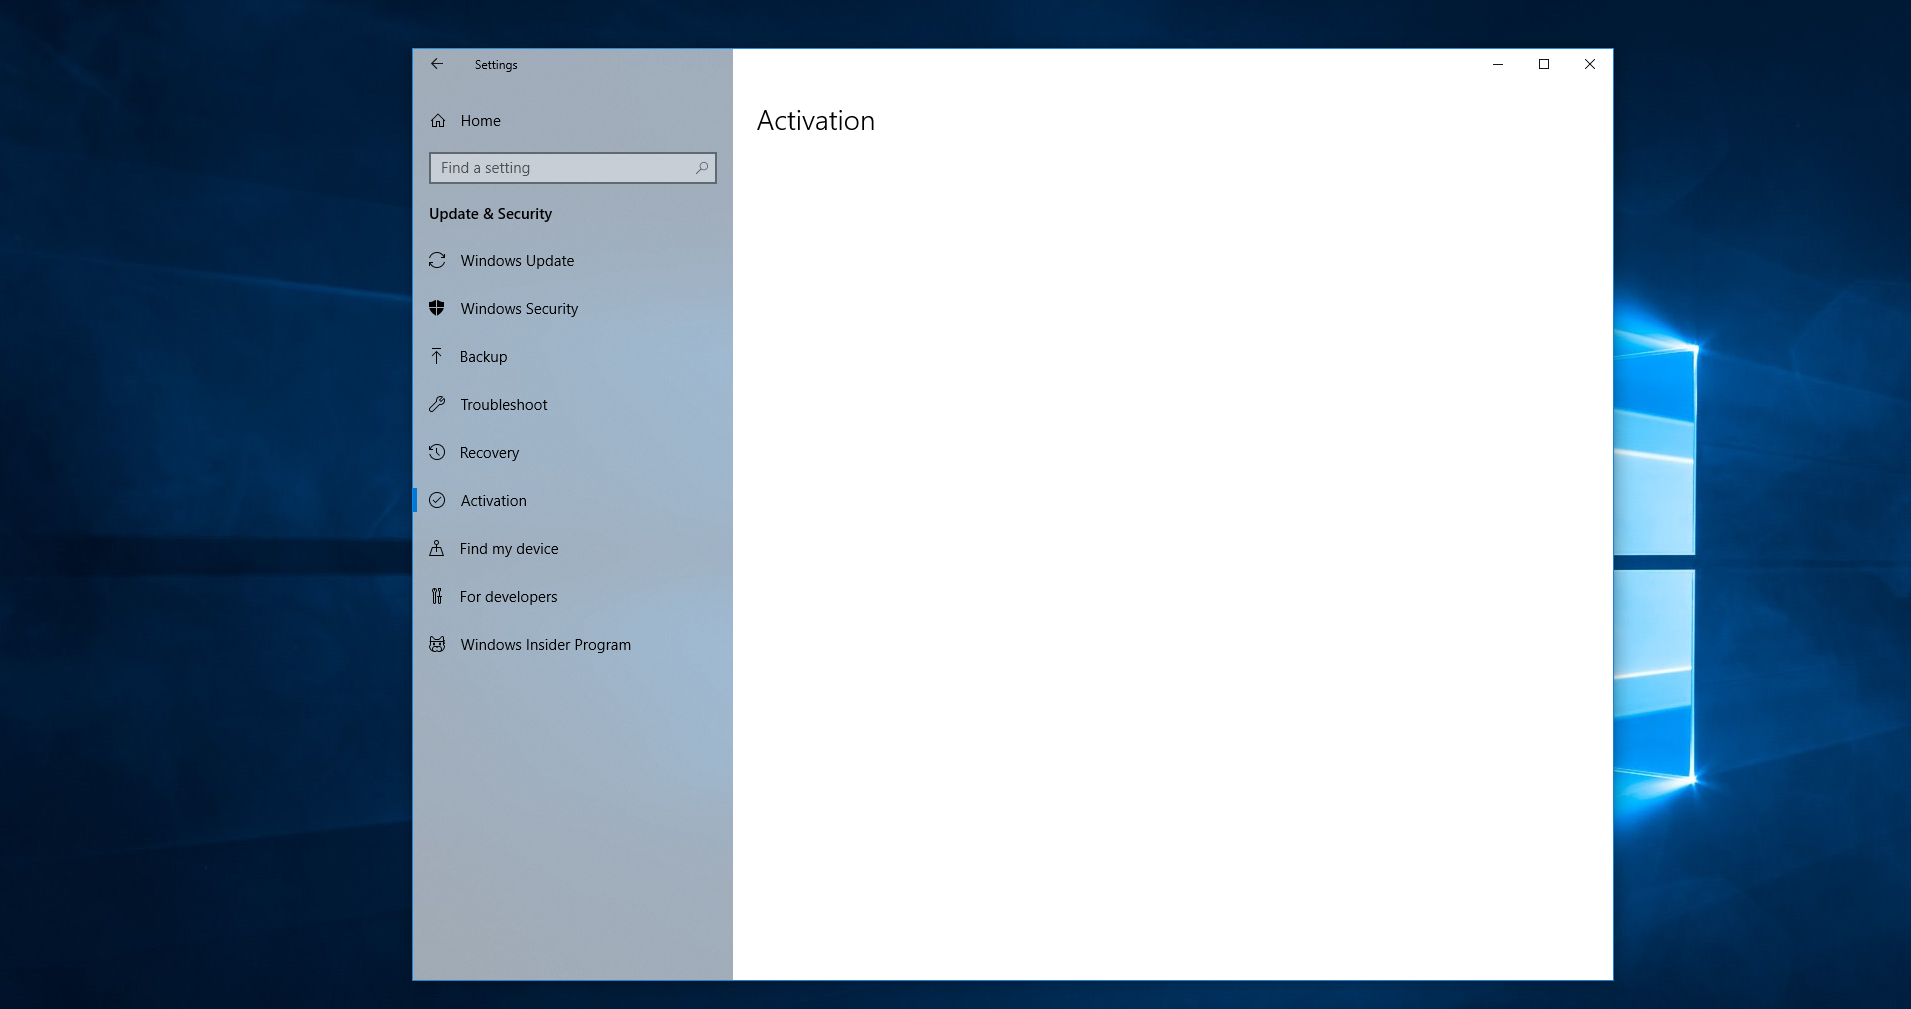 Windows activation screen in settings is blank, blue activation screen pops up repeatedly d0eadaac-6bfd-4afa-85d6-4b13e5c18b05?upload=true.png